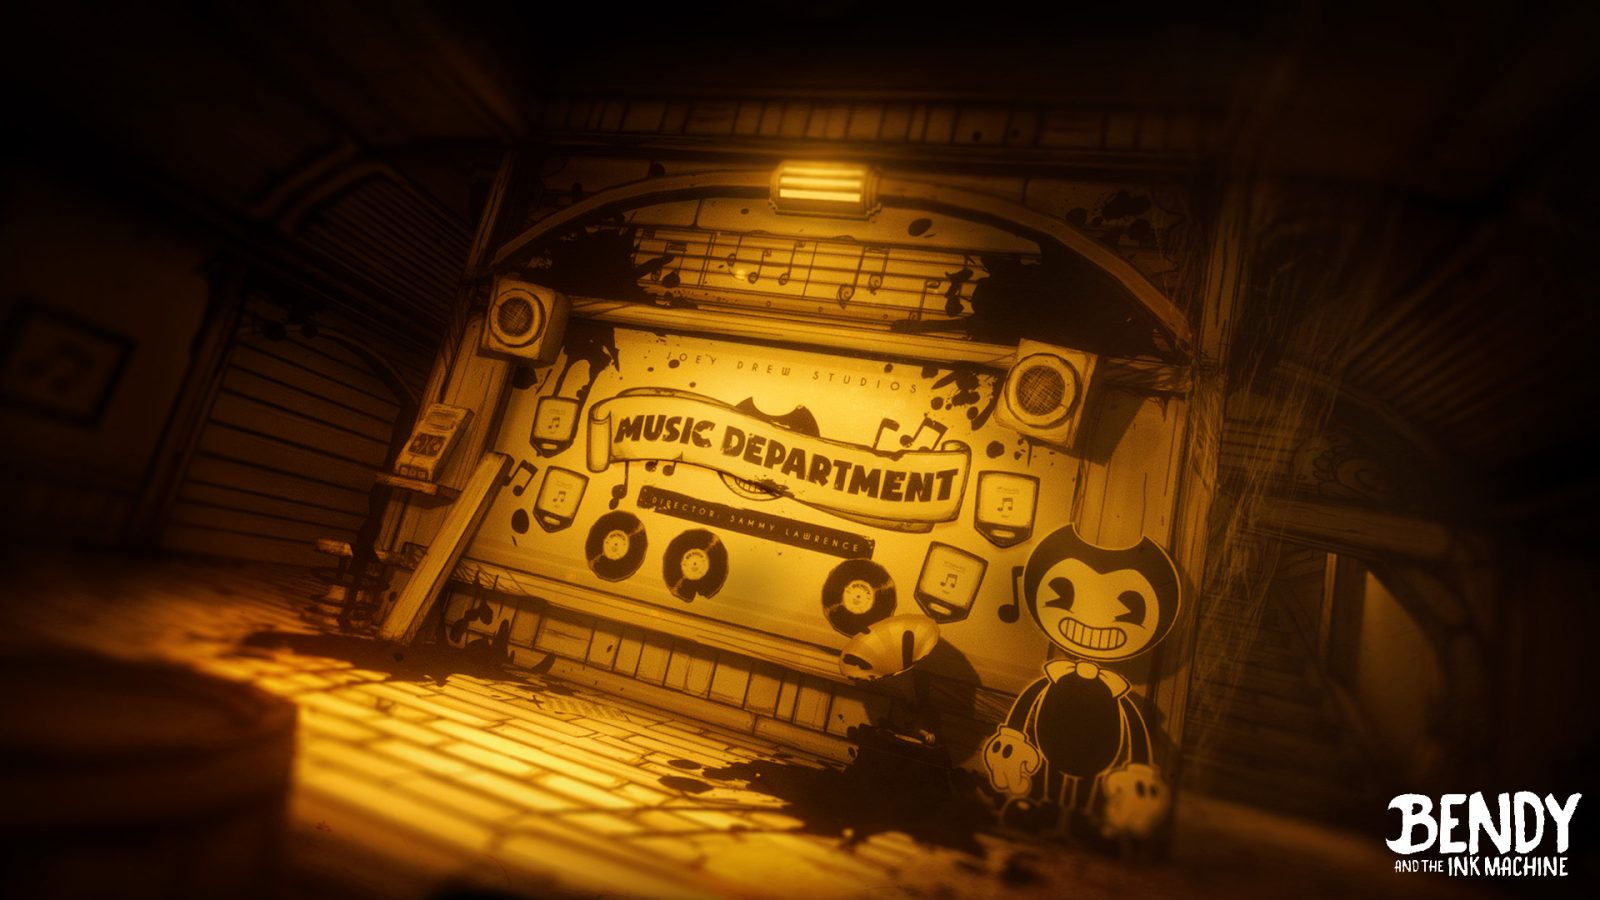 Enter The Twisted Cartoon Nightmare Of Bendy And The Ink